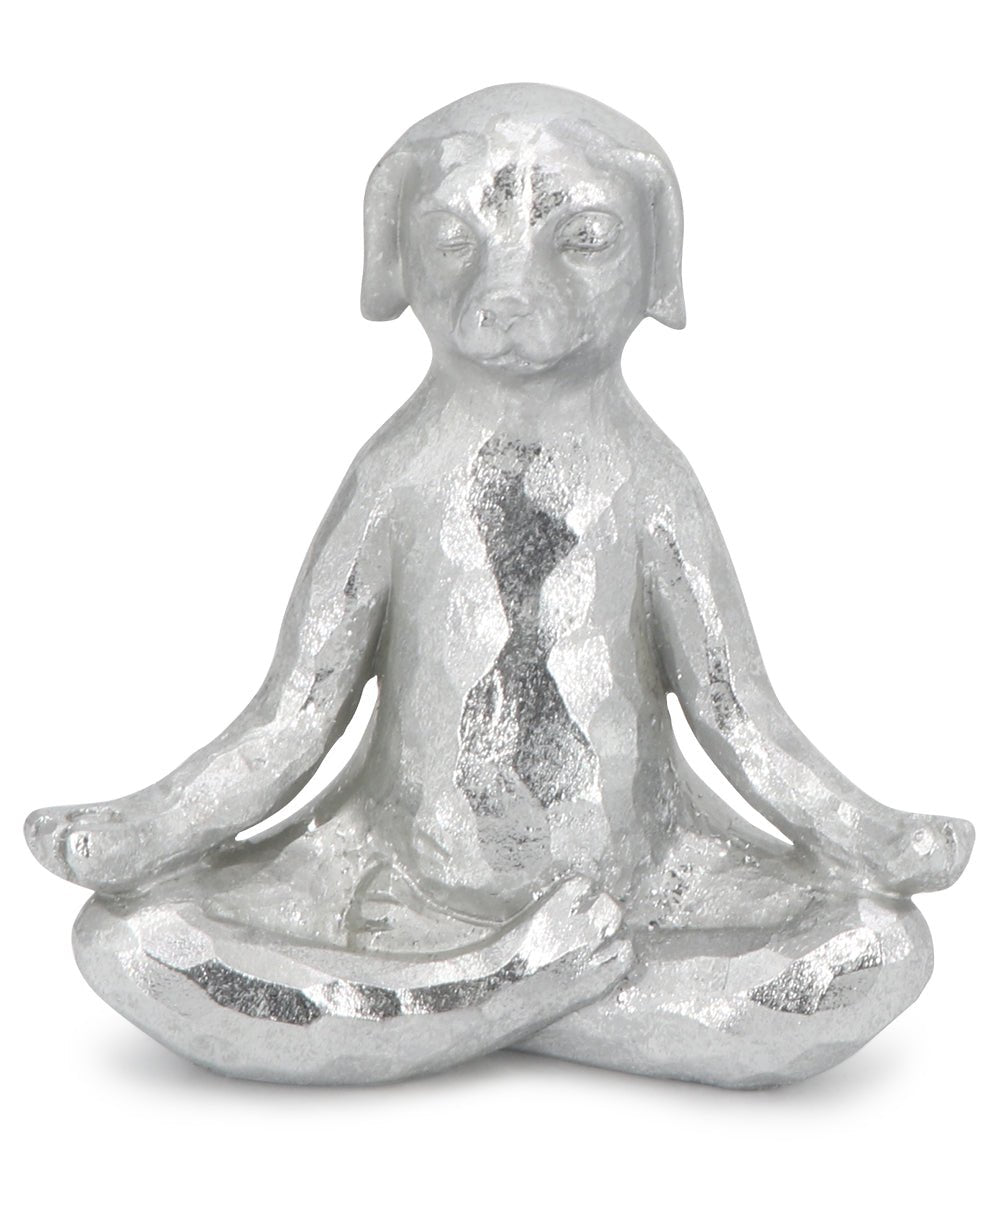 Textured Silver Yoga Dog - Resin Figurine of Serenity